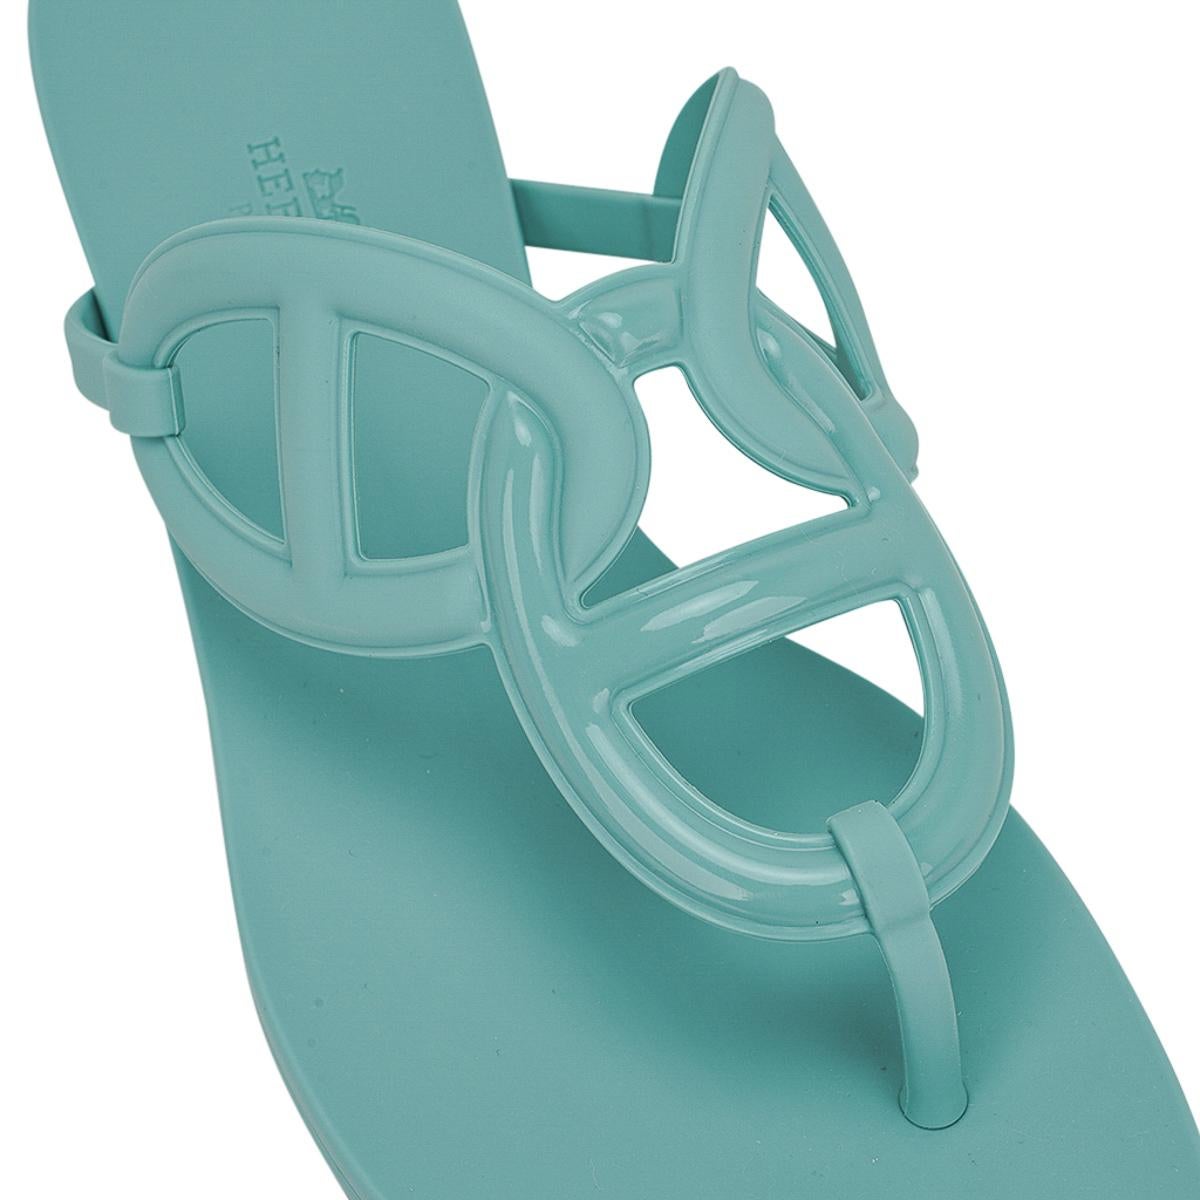 Mightychic offers limited edition Hermes Egerie waterproof sandals featured in Vert Embrun.
This chic flat will have you ready for all weather conditions this summer in the most comfortable go to sandal.
The thong sandal was inspired by the iconic